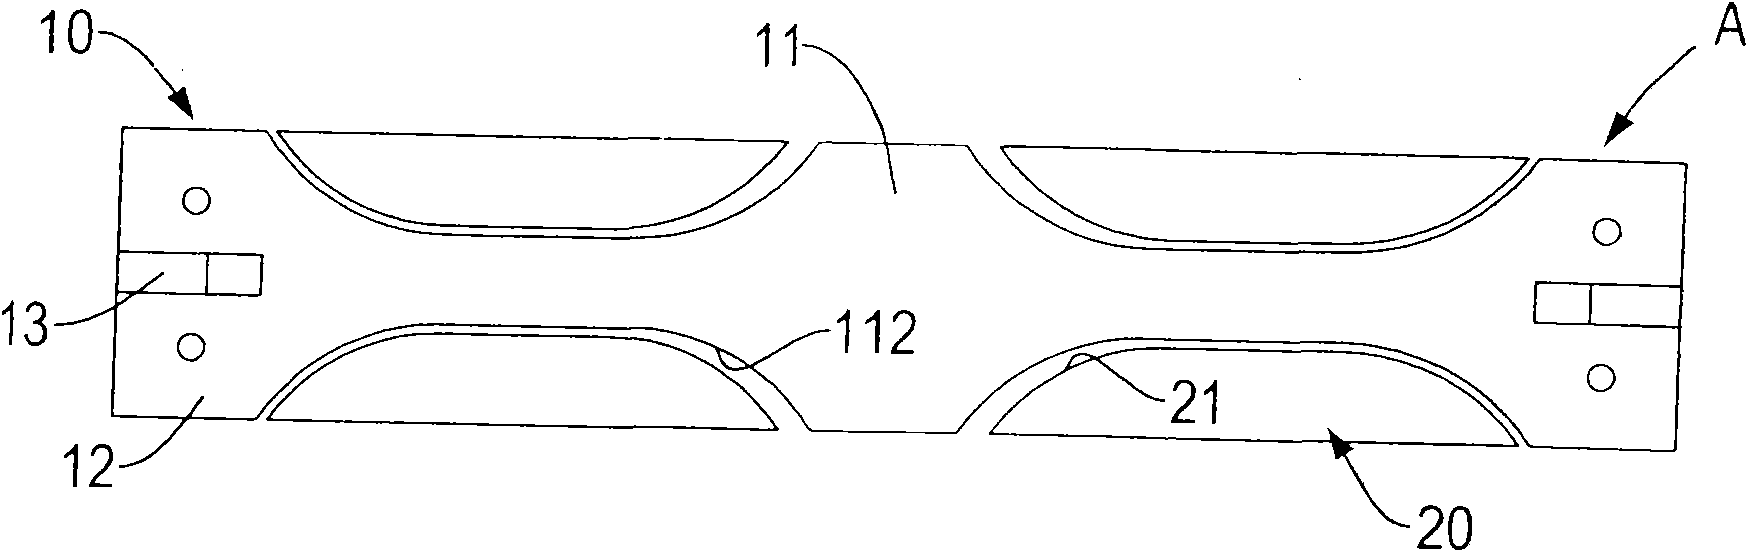 Energy dissipation supporting device